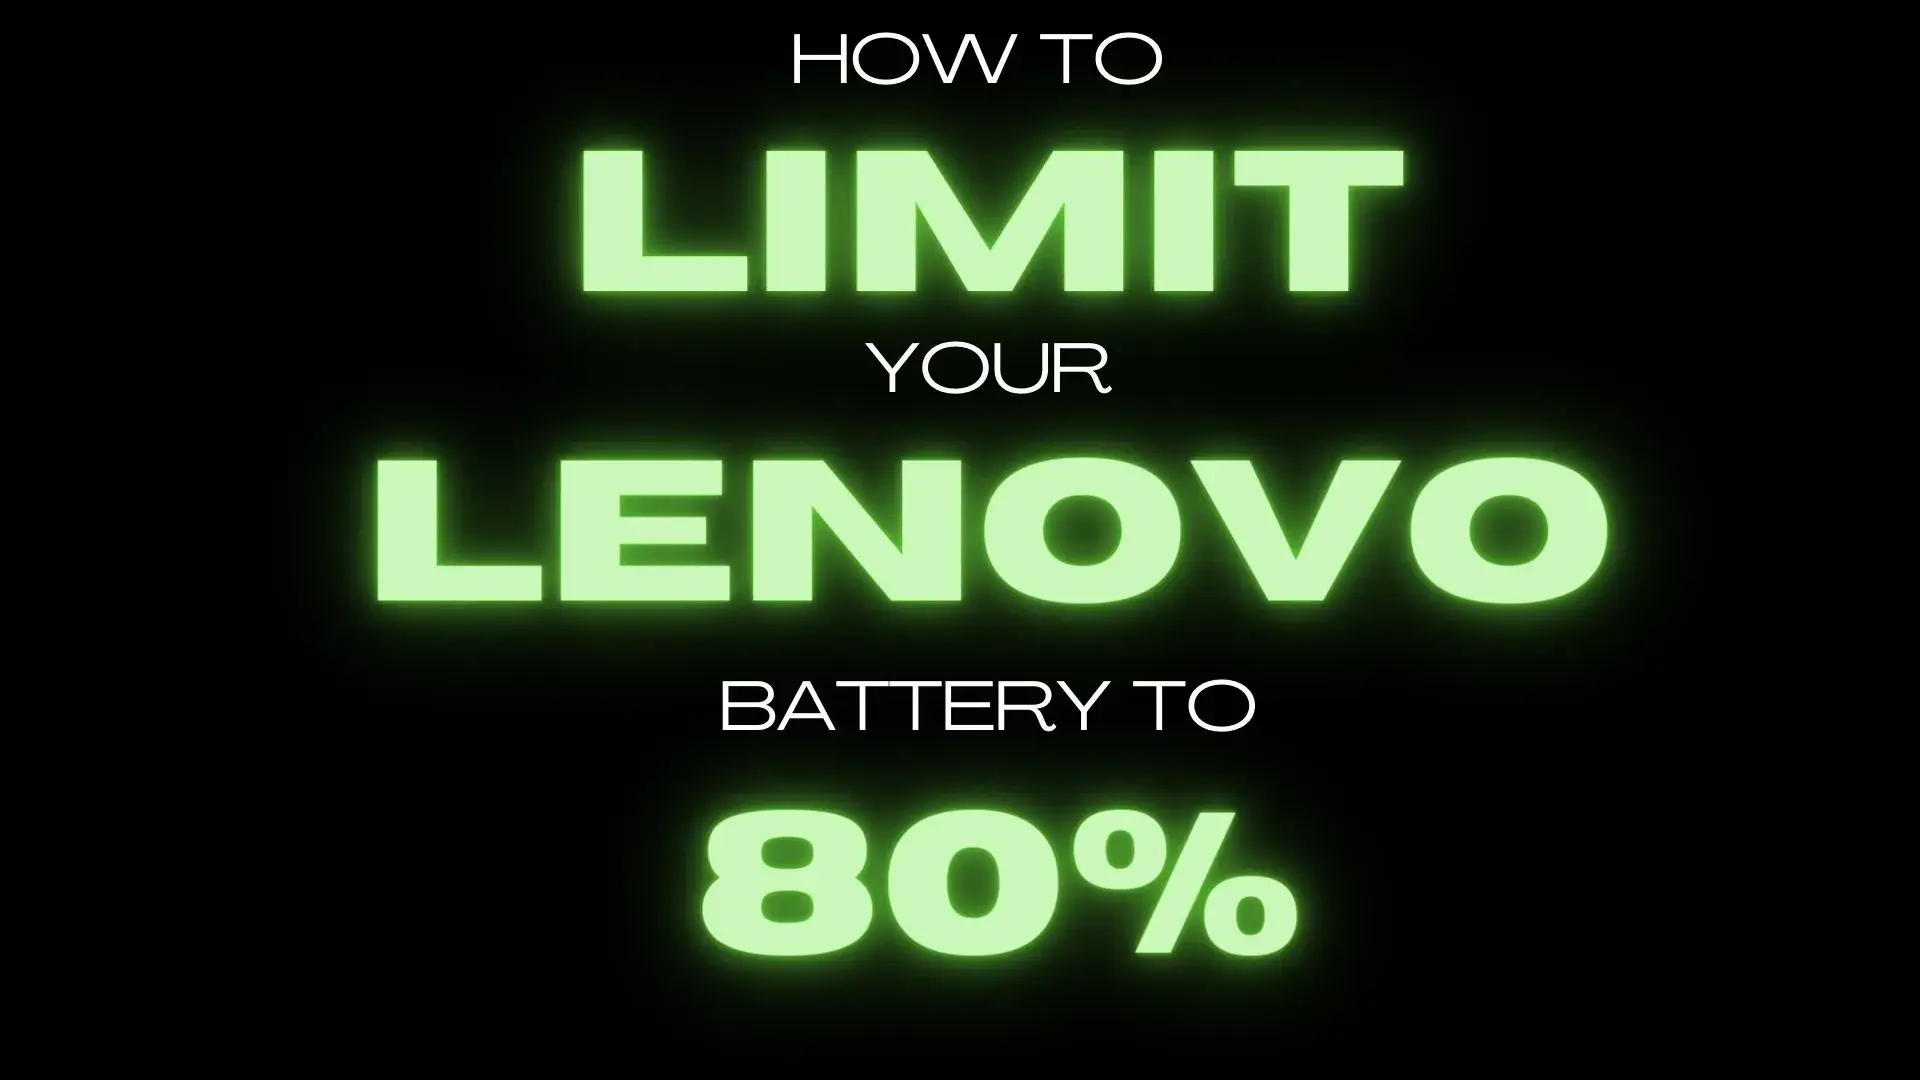 How to Limit Battery Charge to 80 Percent on a Lenovo